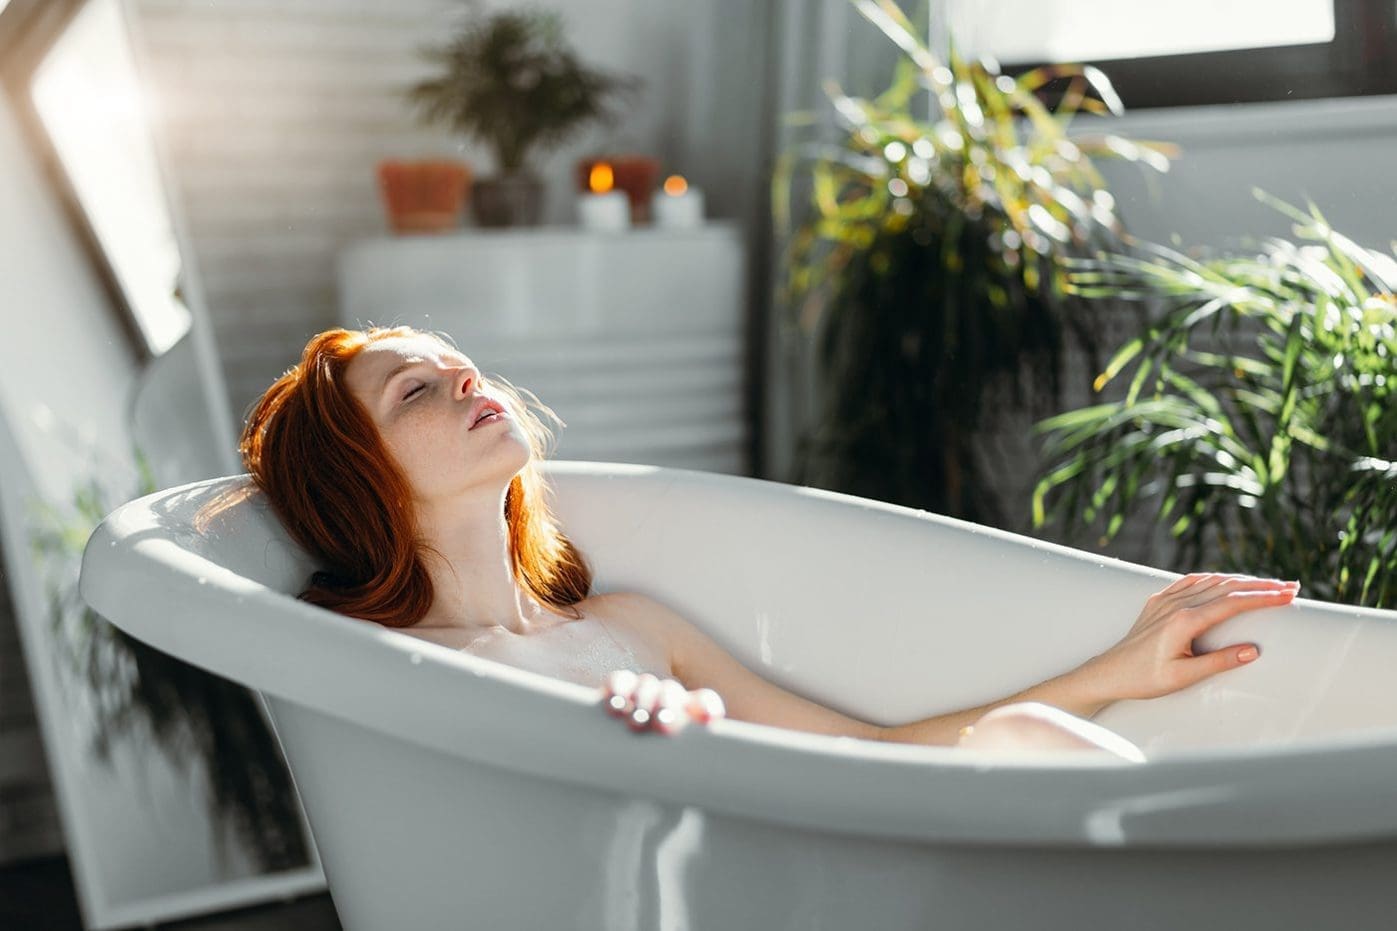 Take your day from ordinary to extraordinary with a CBD bath.